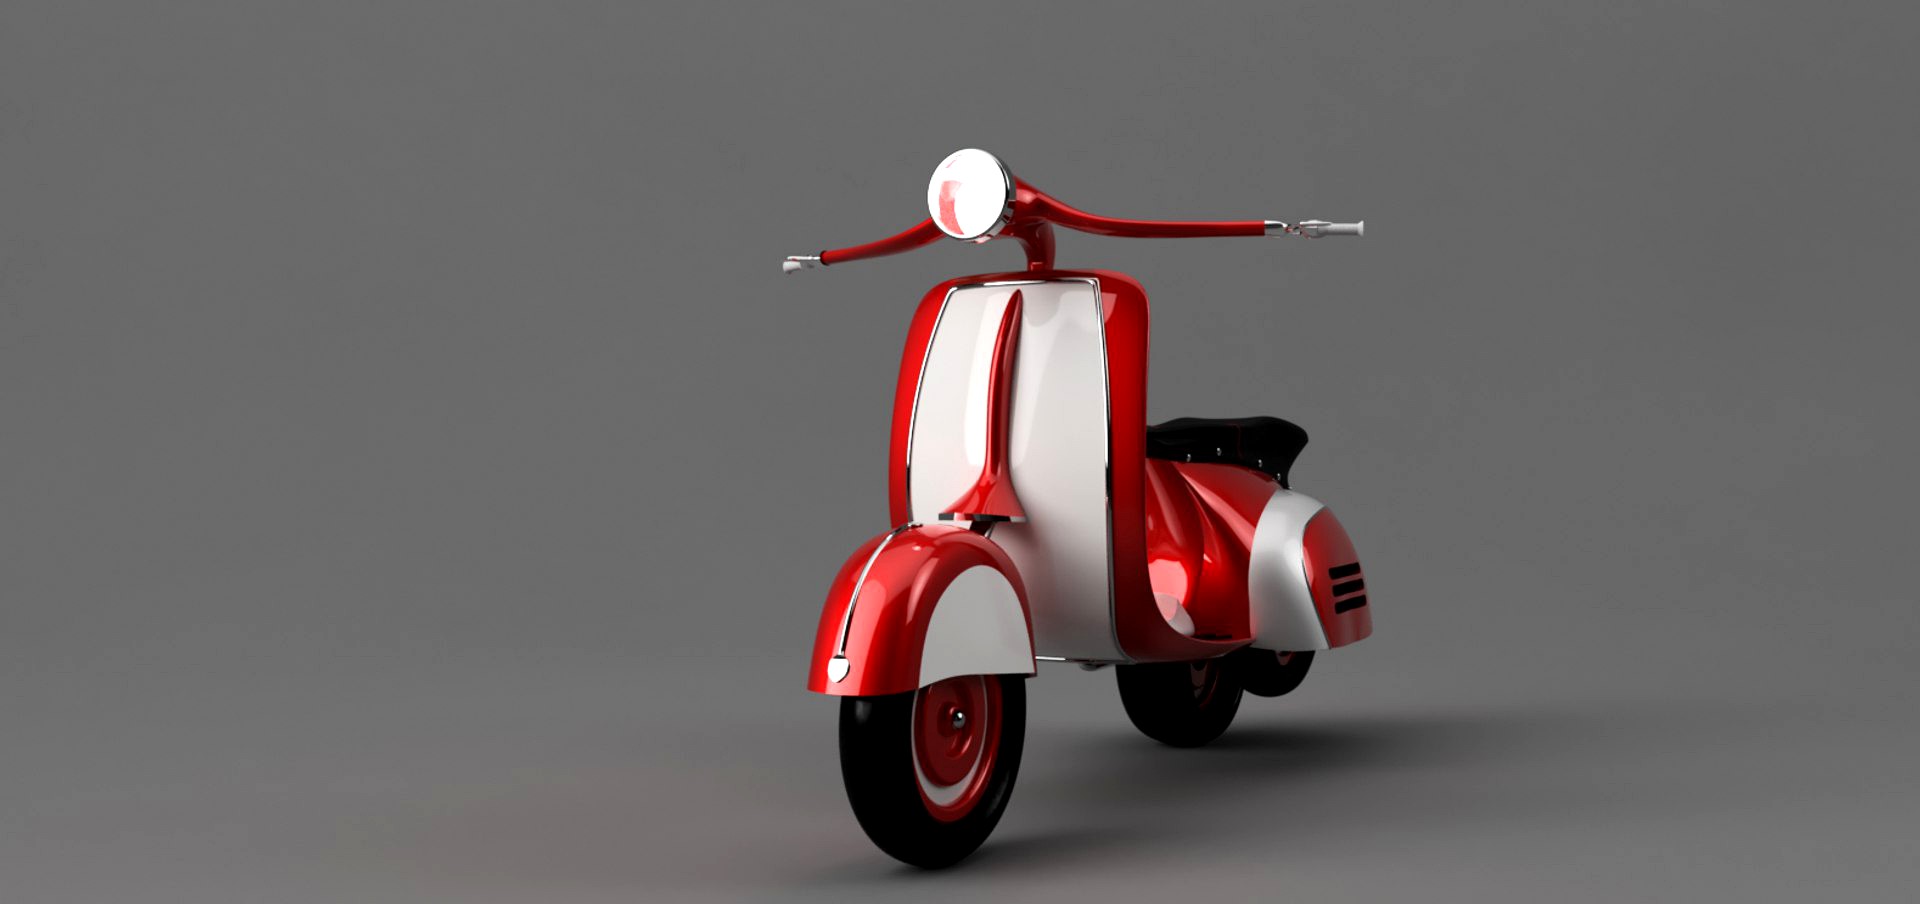 1960' scooter